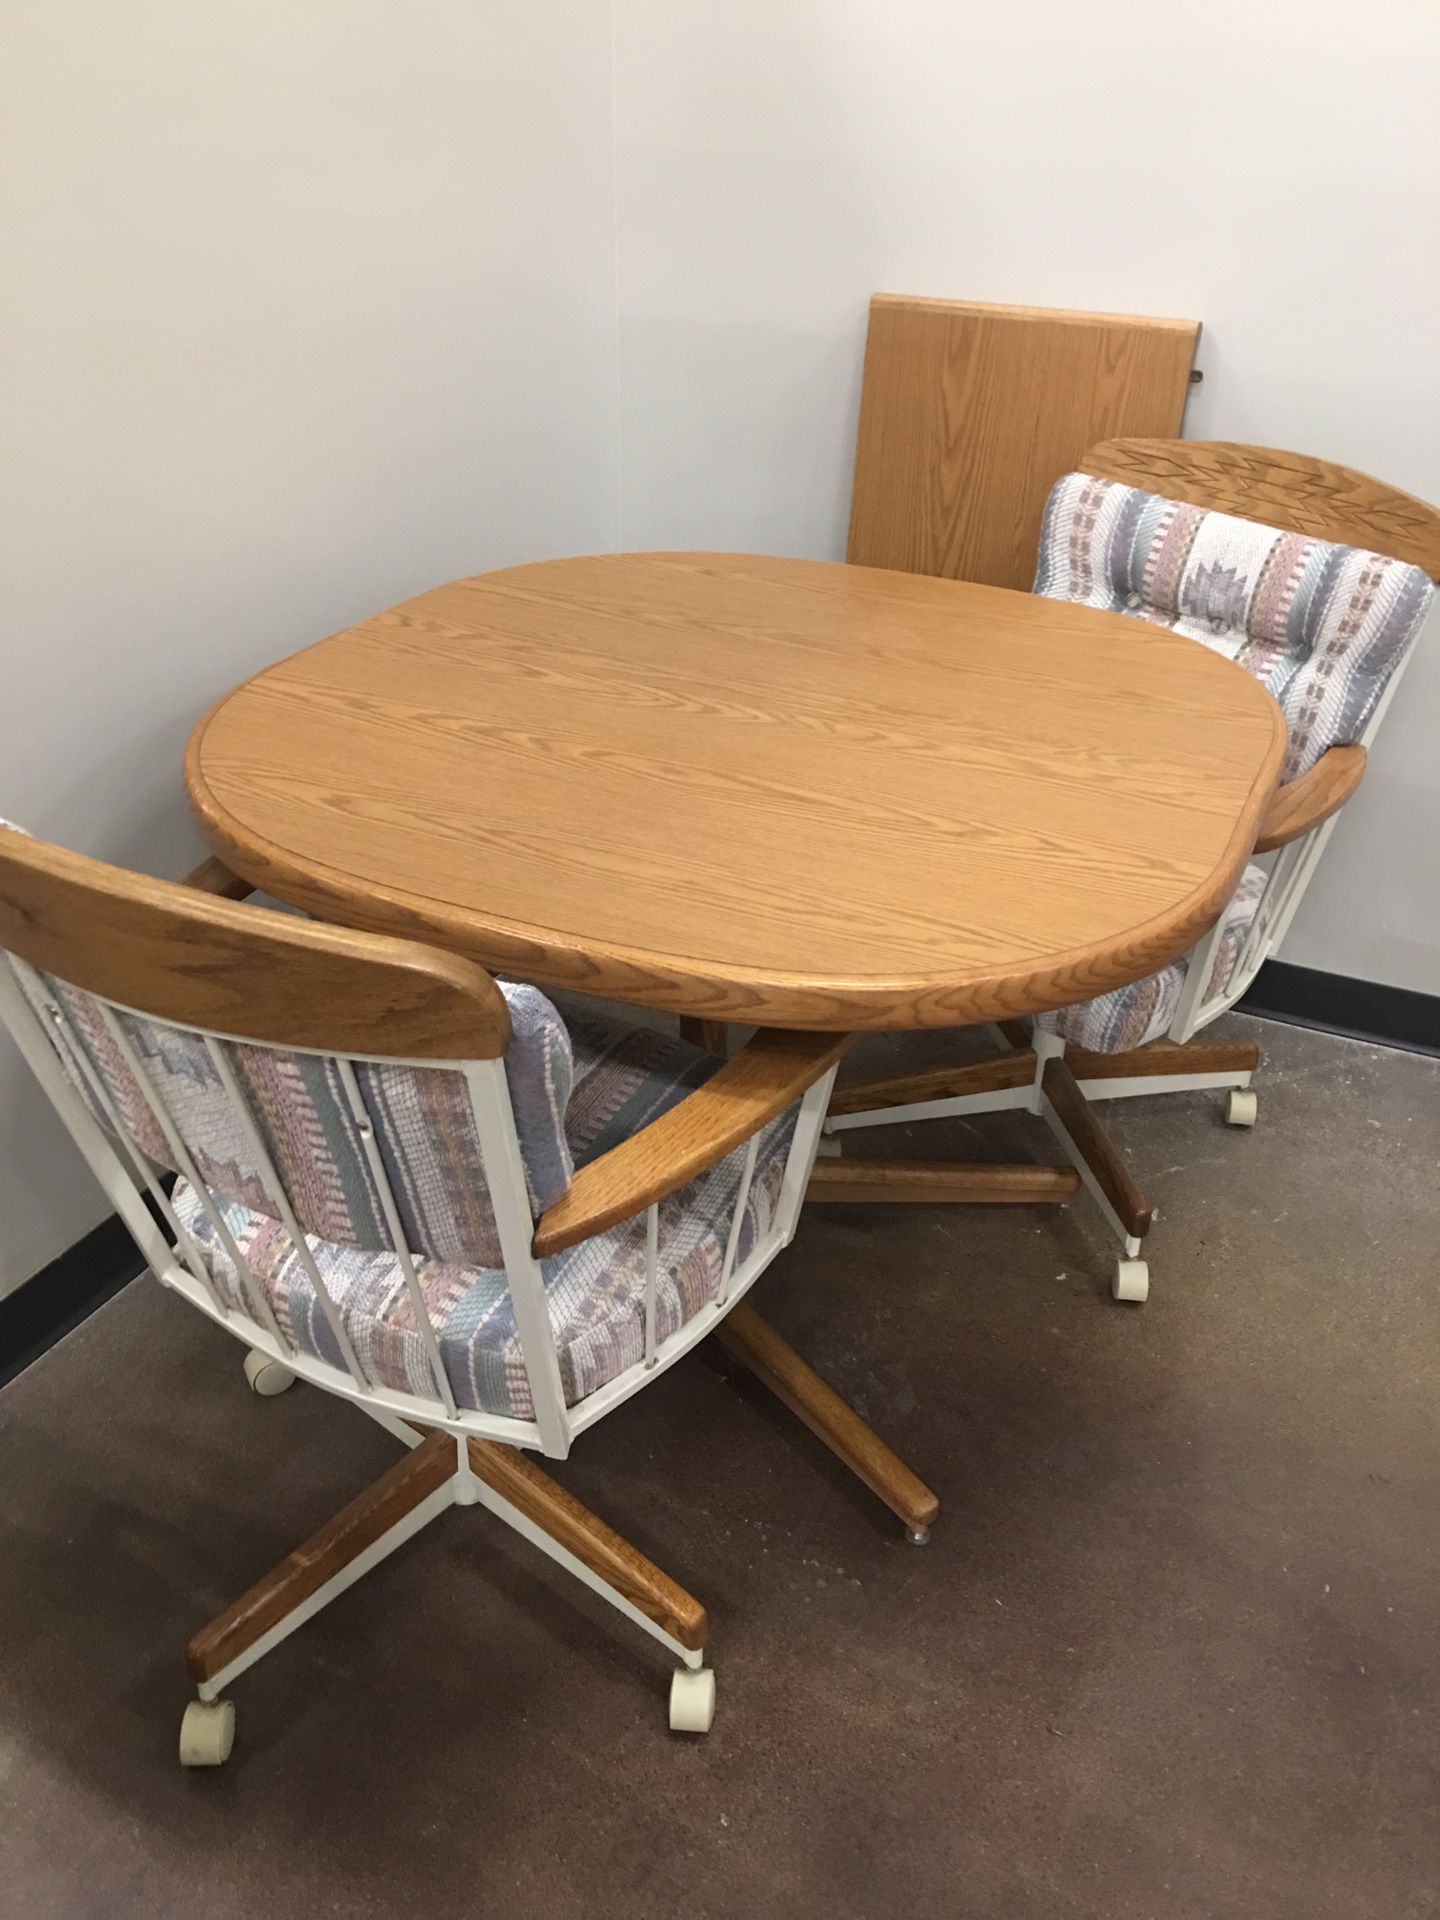 Table w/2 chairs